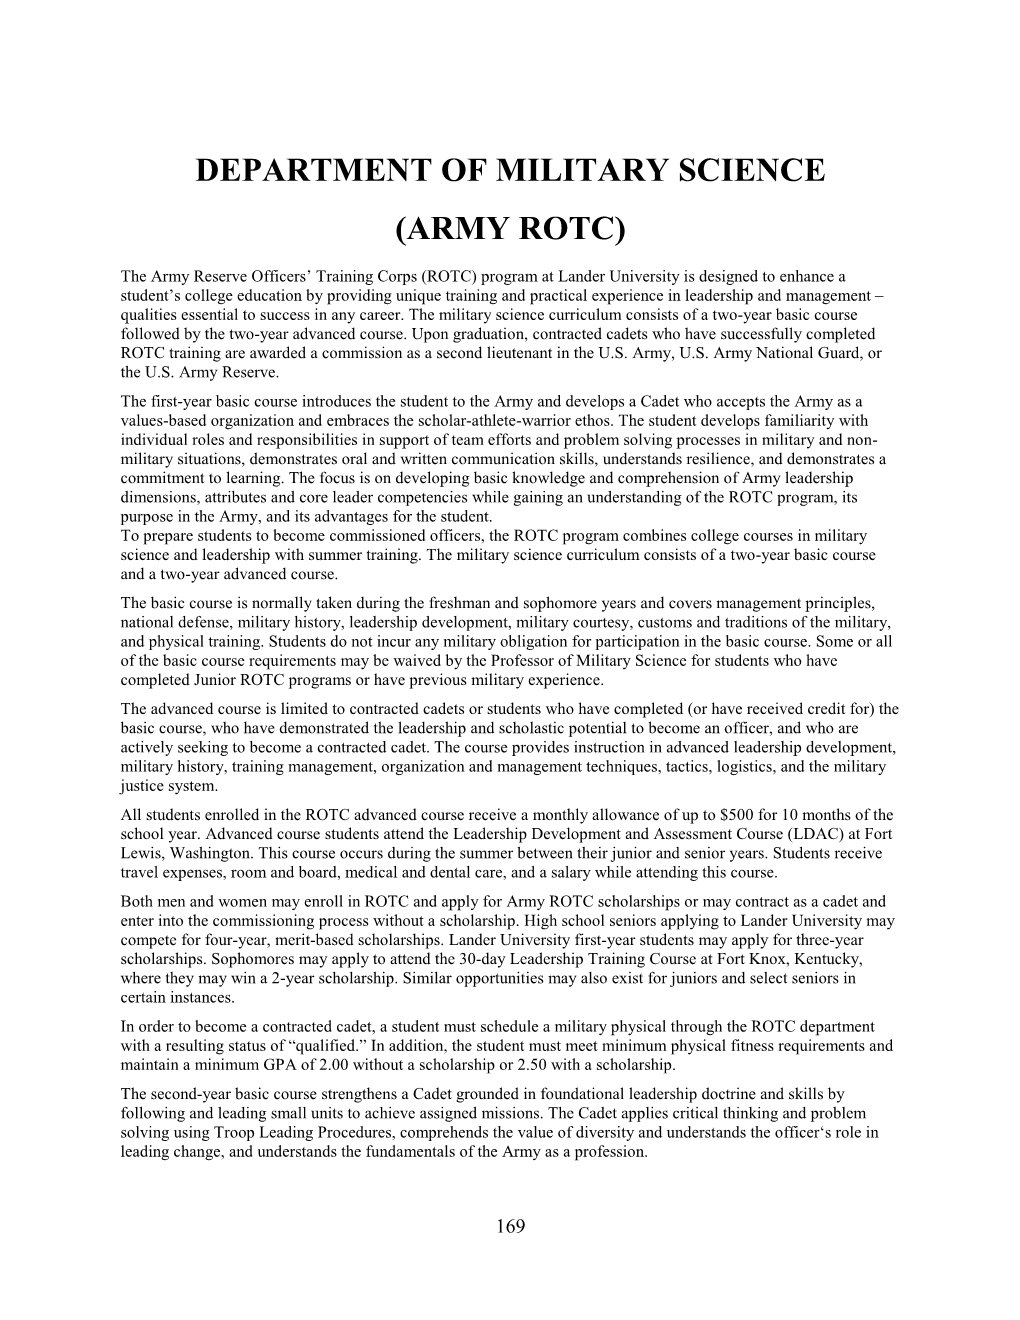 Department of Military Science (Army Rotc)